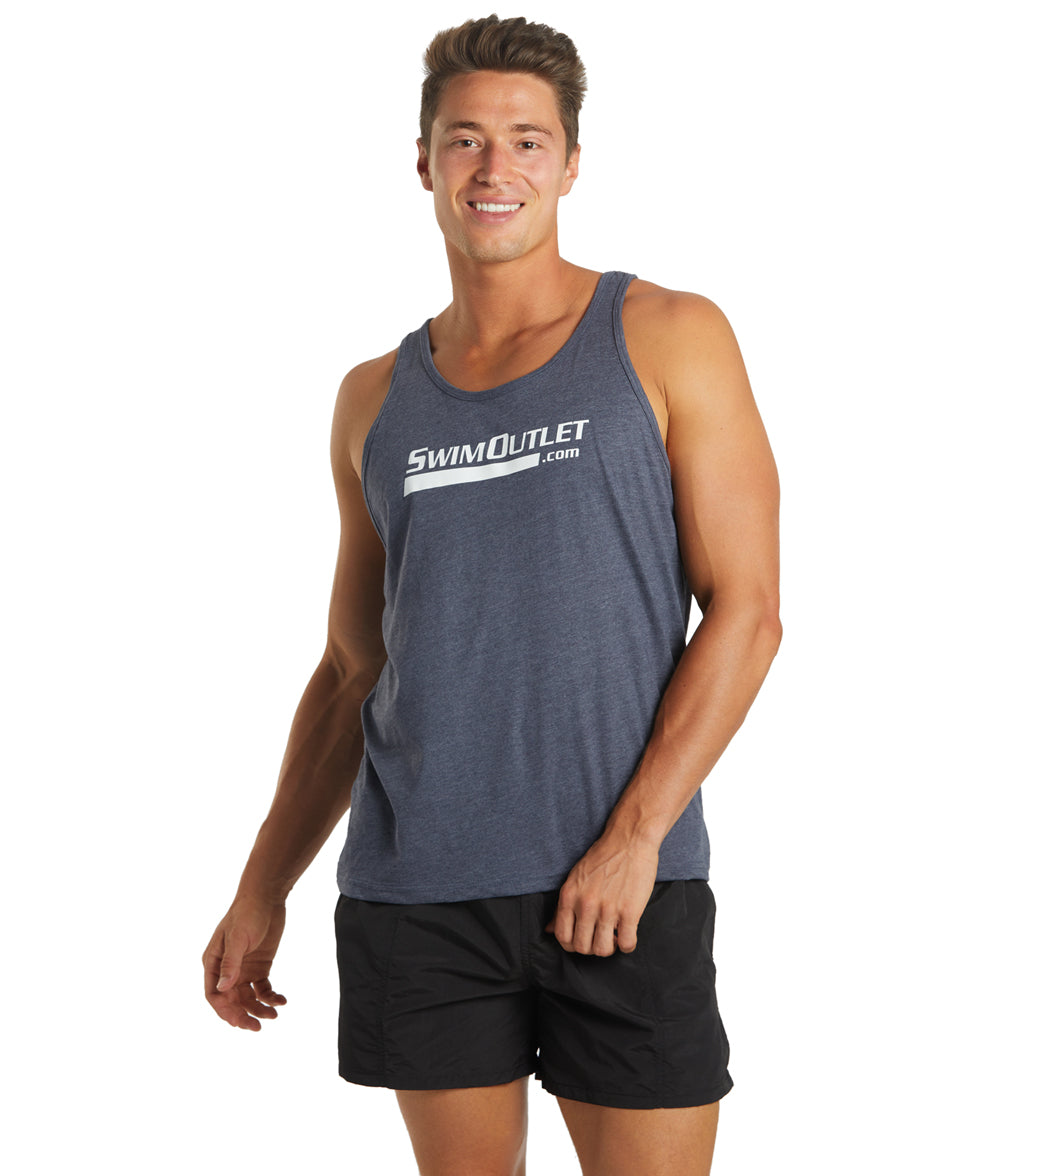 SwimOutlet Limited Edition Men's Tank Top